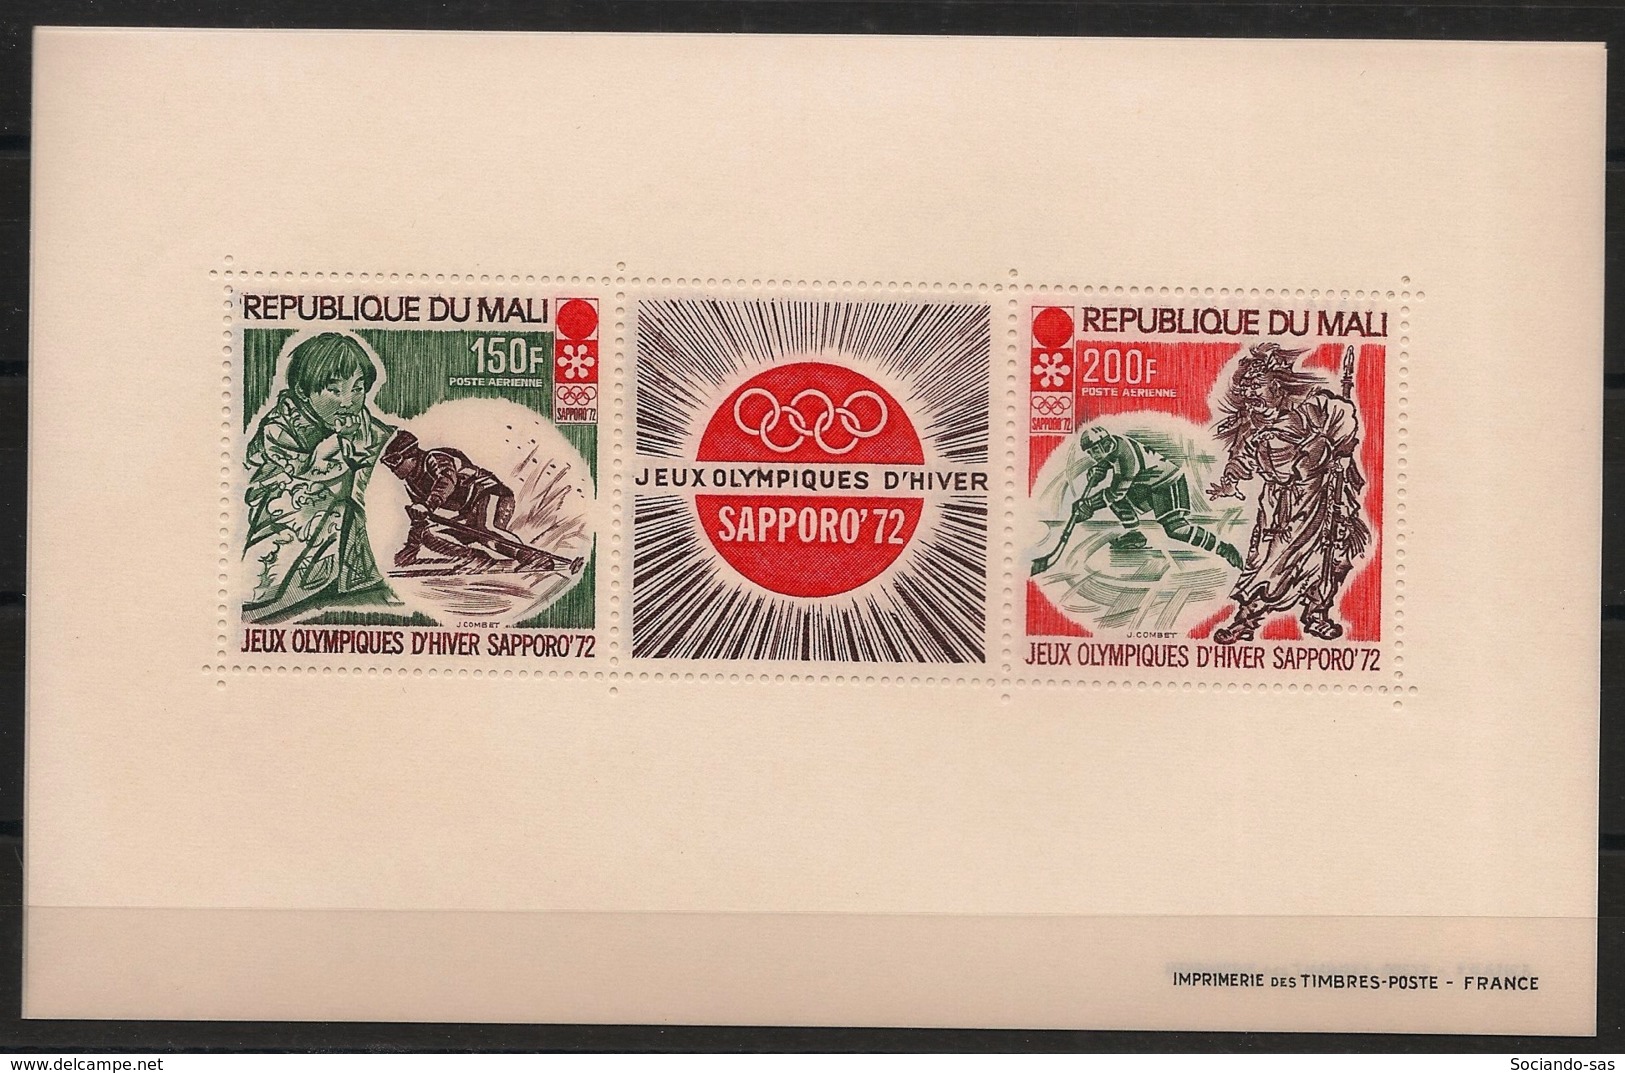 Mali - 1972 - Bloc Feuillet BF N°Yv. 5 - Olympics / Sapporo - Neuf Luxe ** / MNH / Postfrisch - Malí (1959-...)